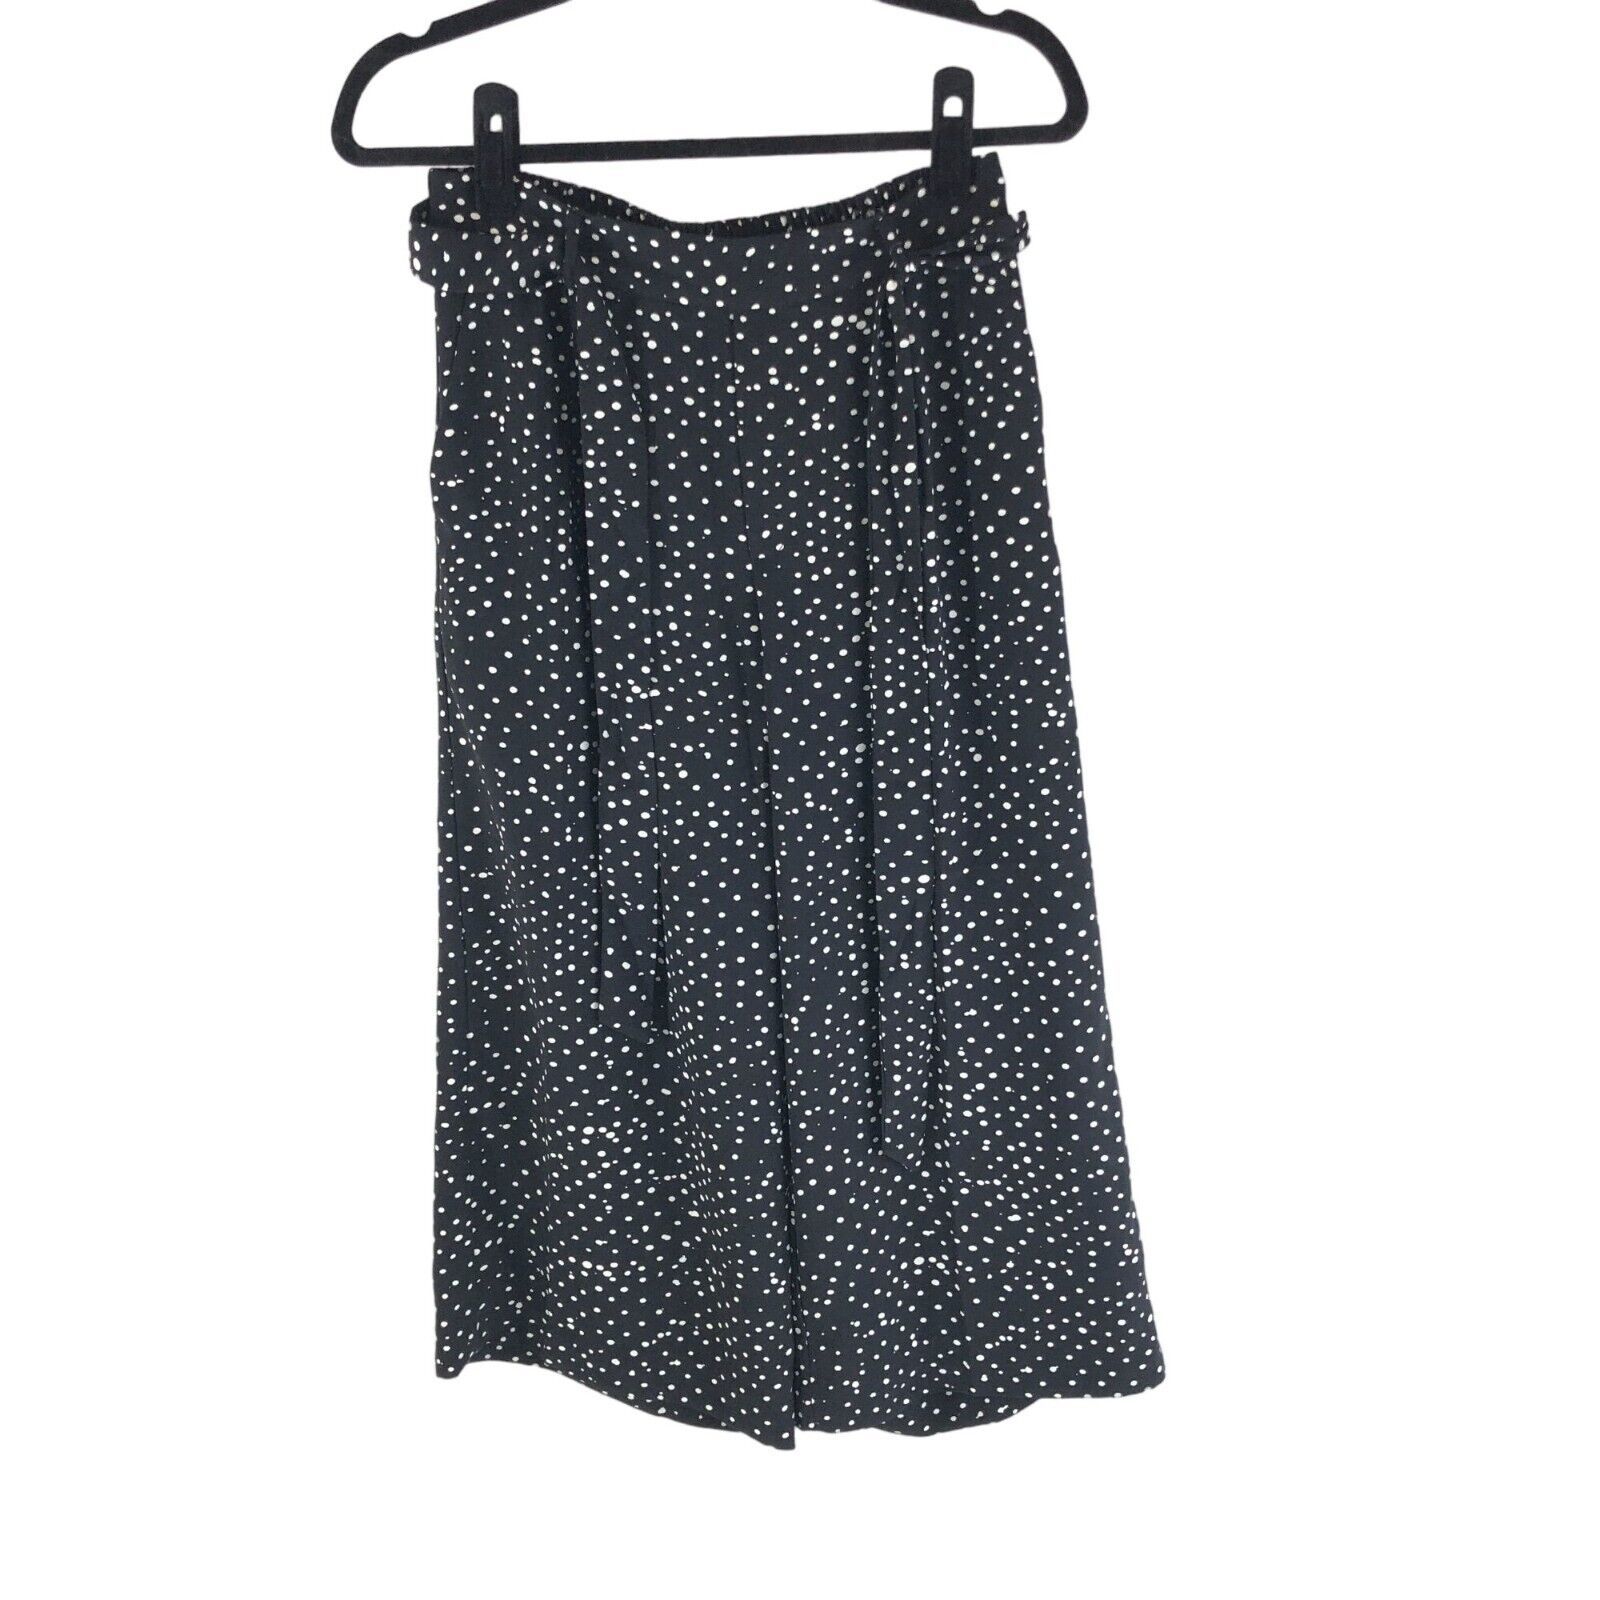 Primary image for T Tahari Womens Crop Pants Wide Leg Belted Polka Dot Black White PS